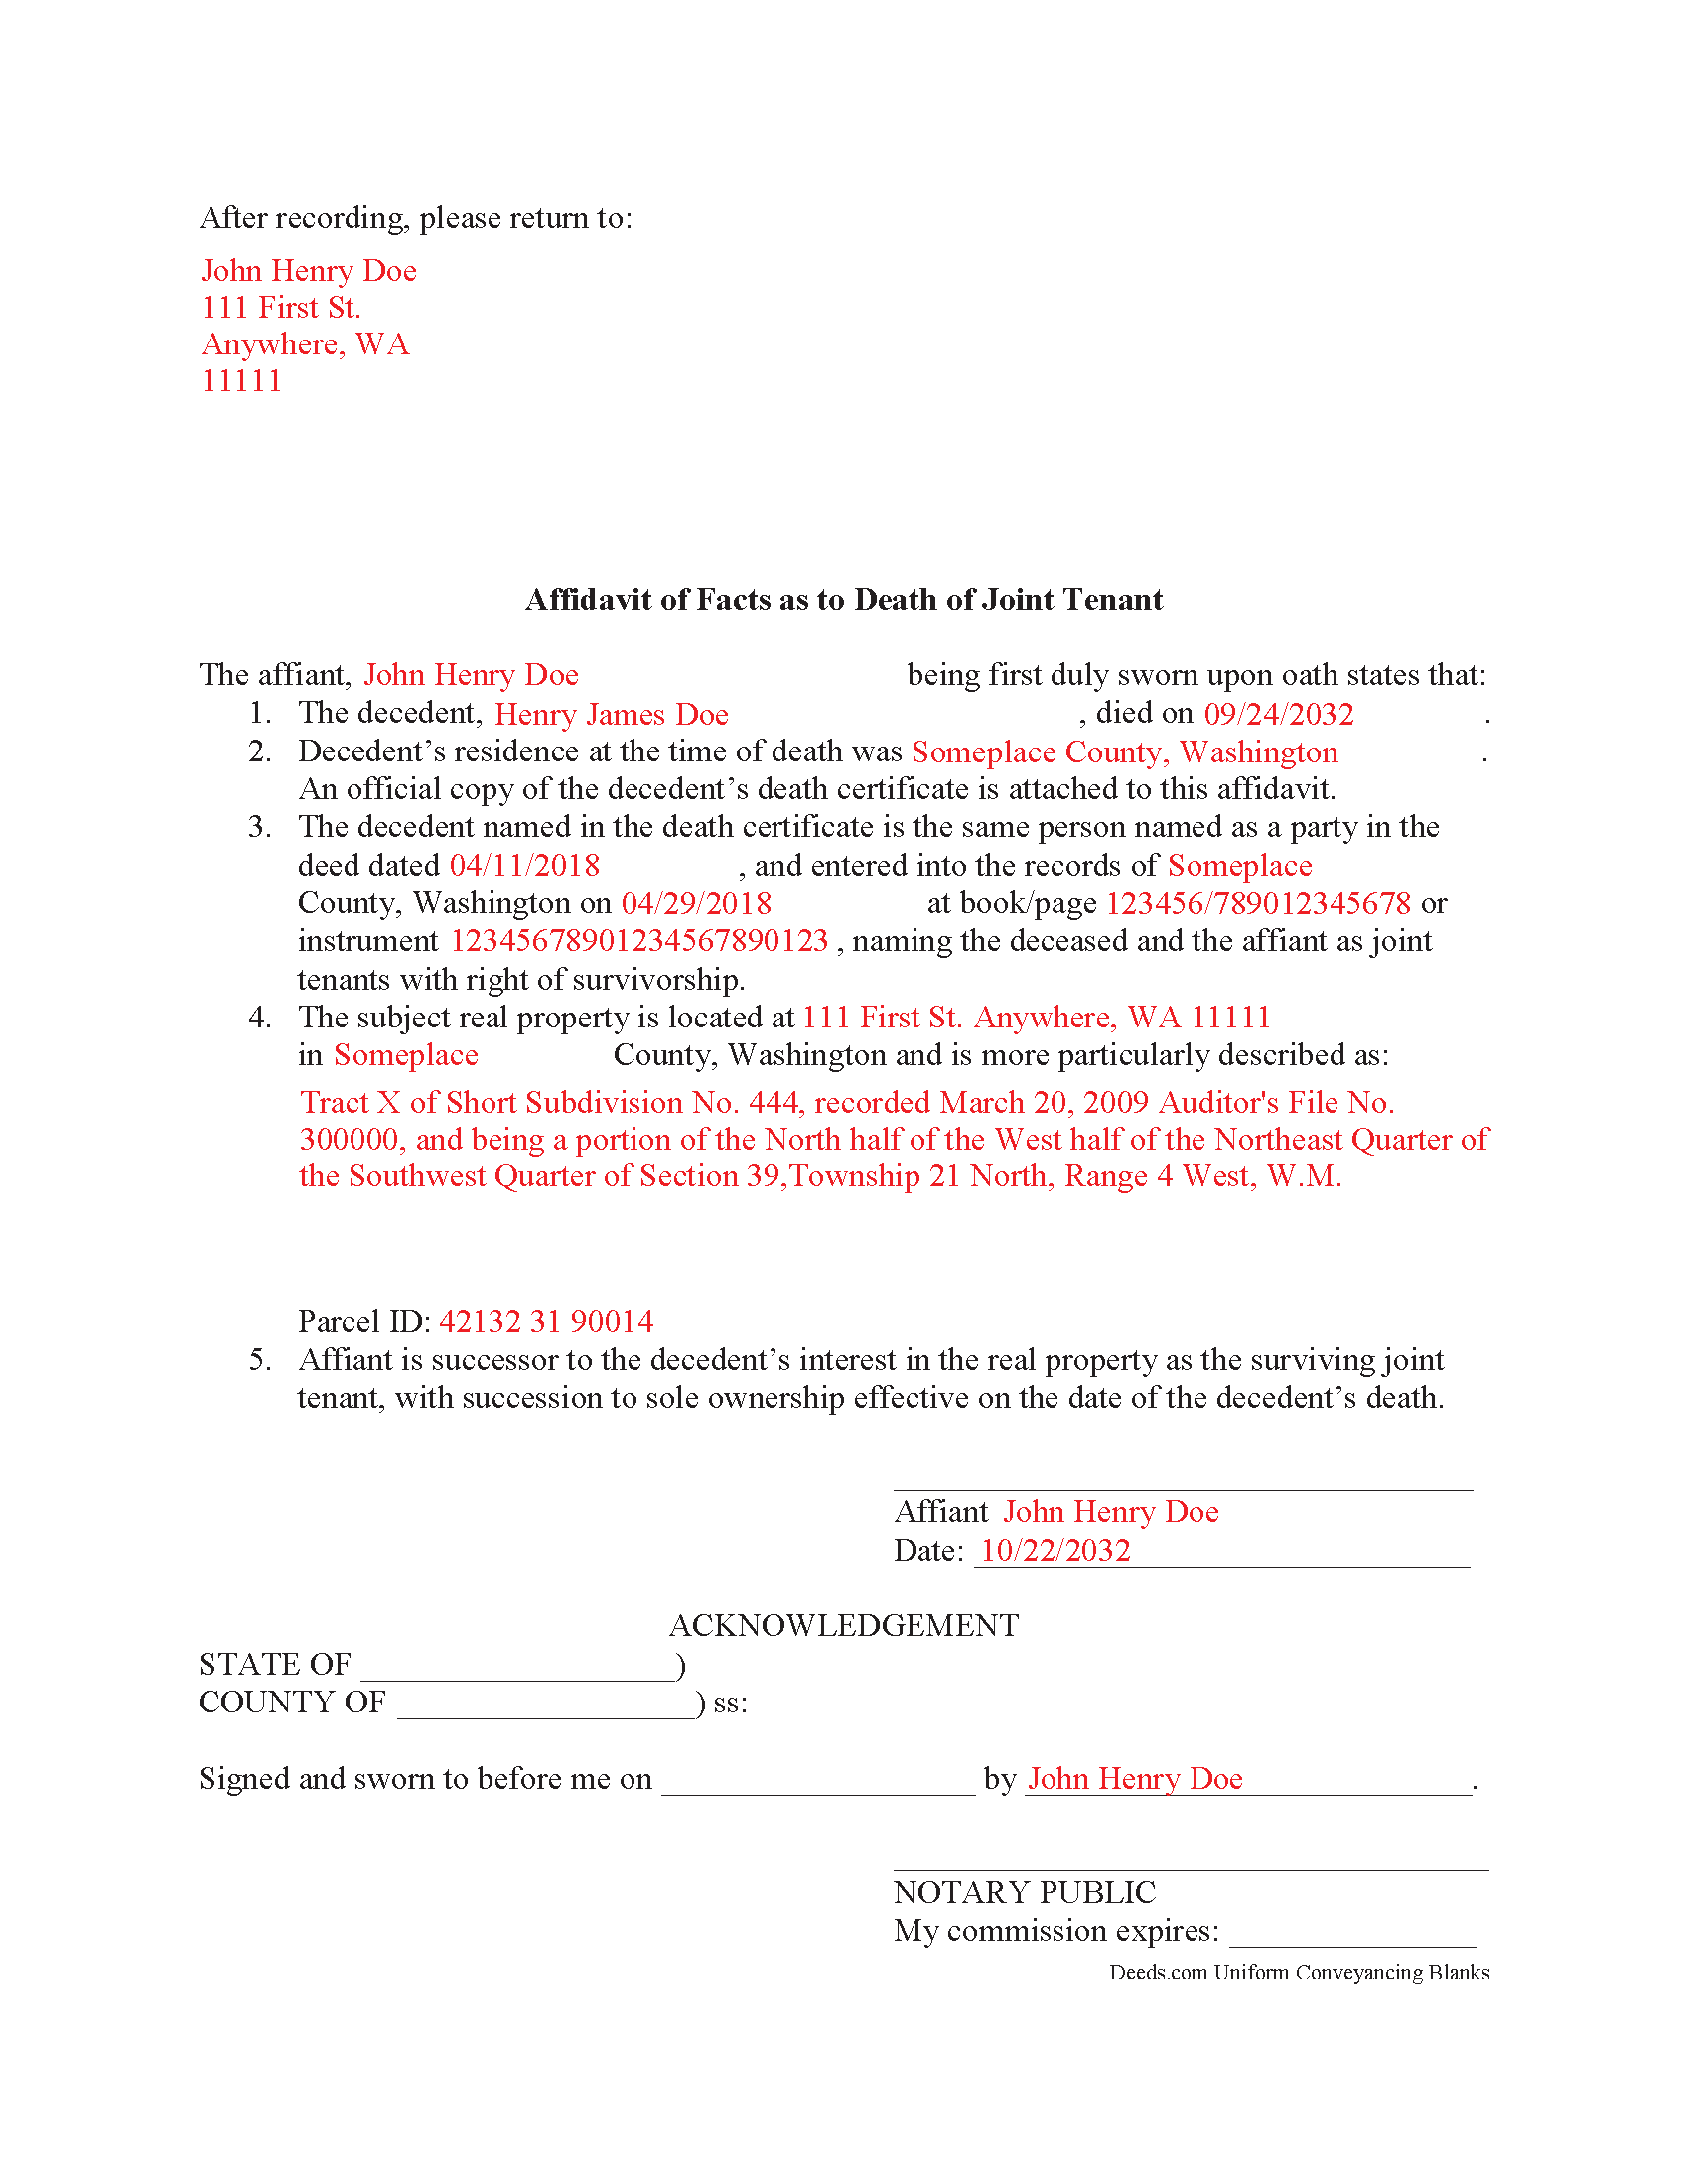 Completed Example of the Affidavit of Deceased Joint Tenant Document